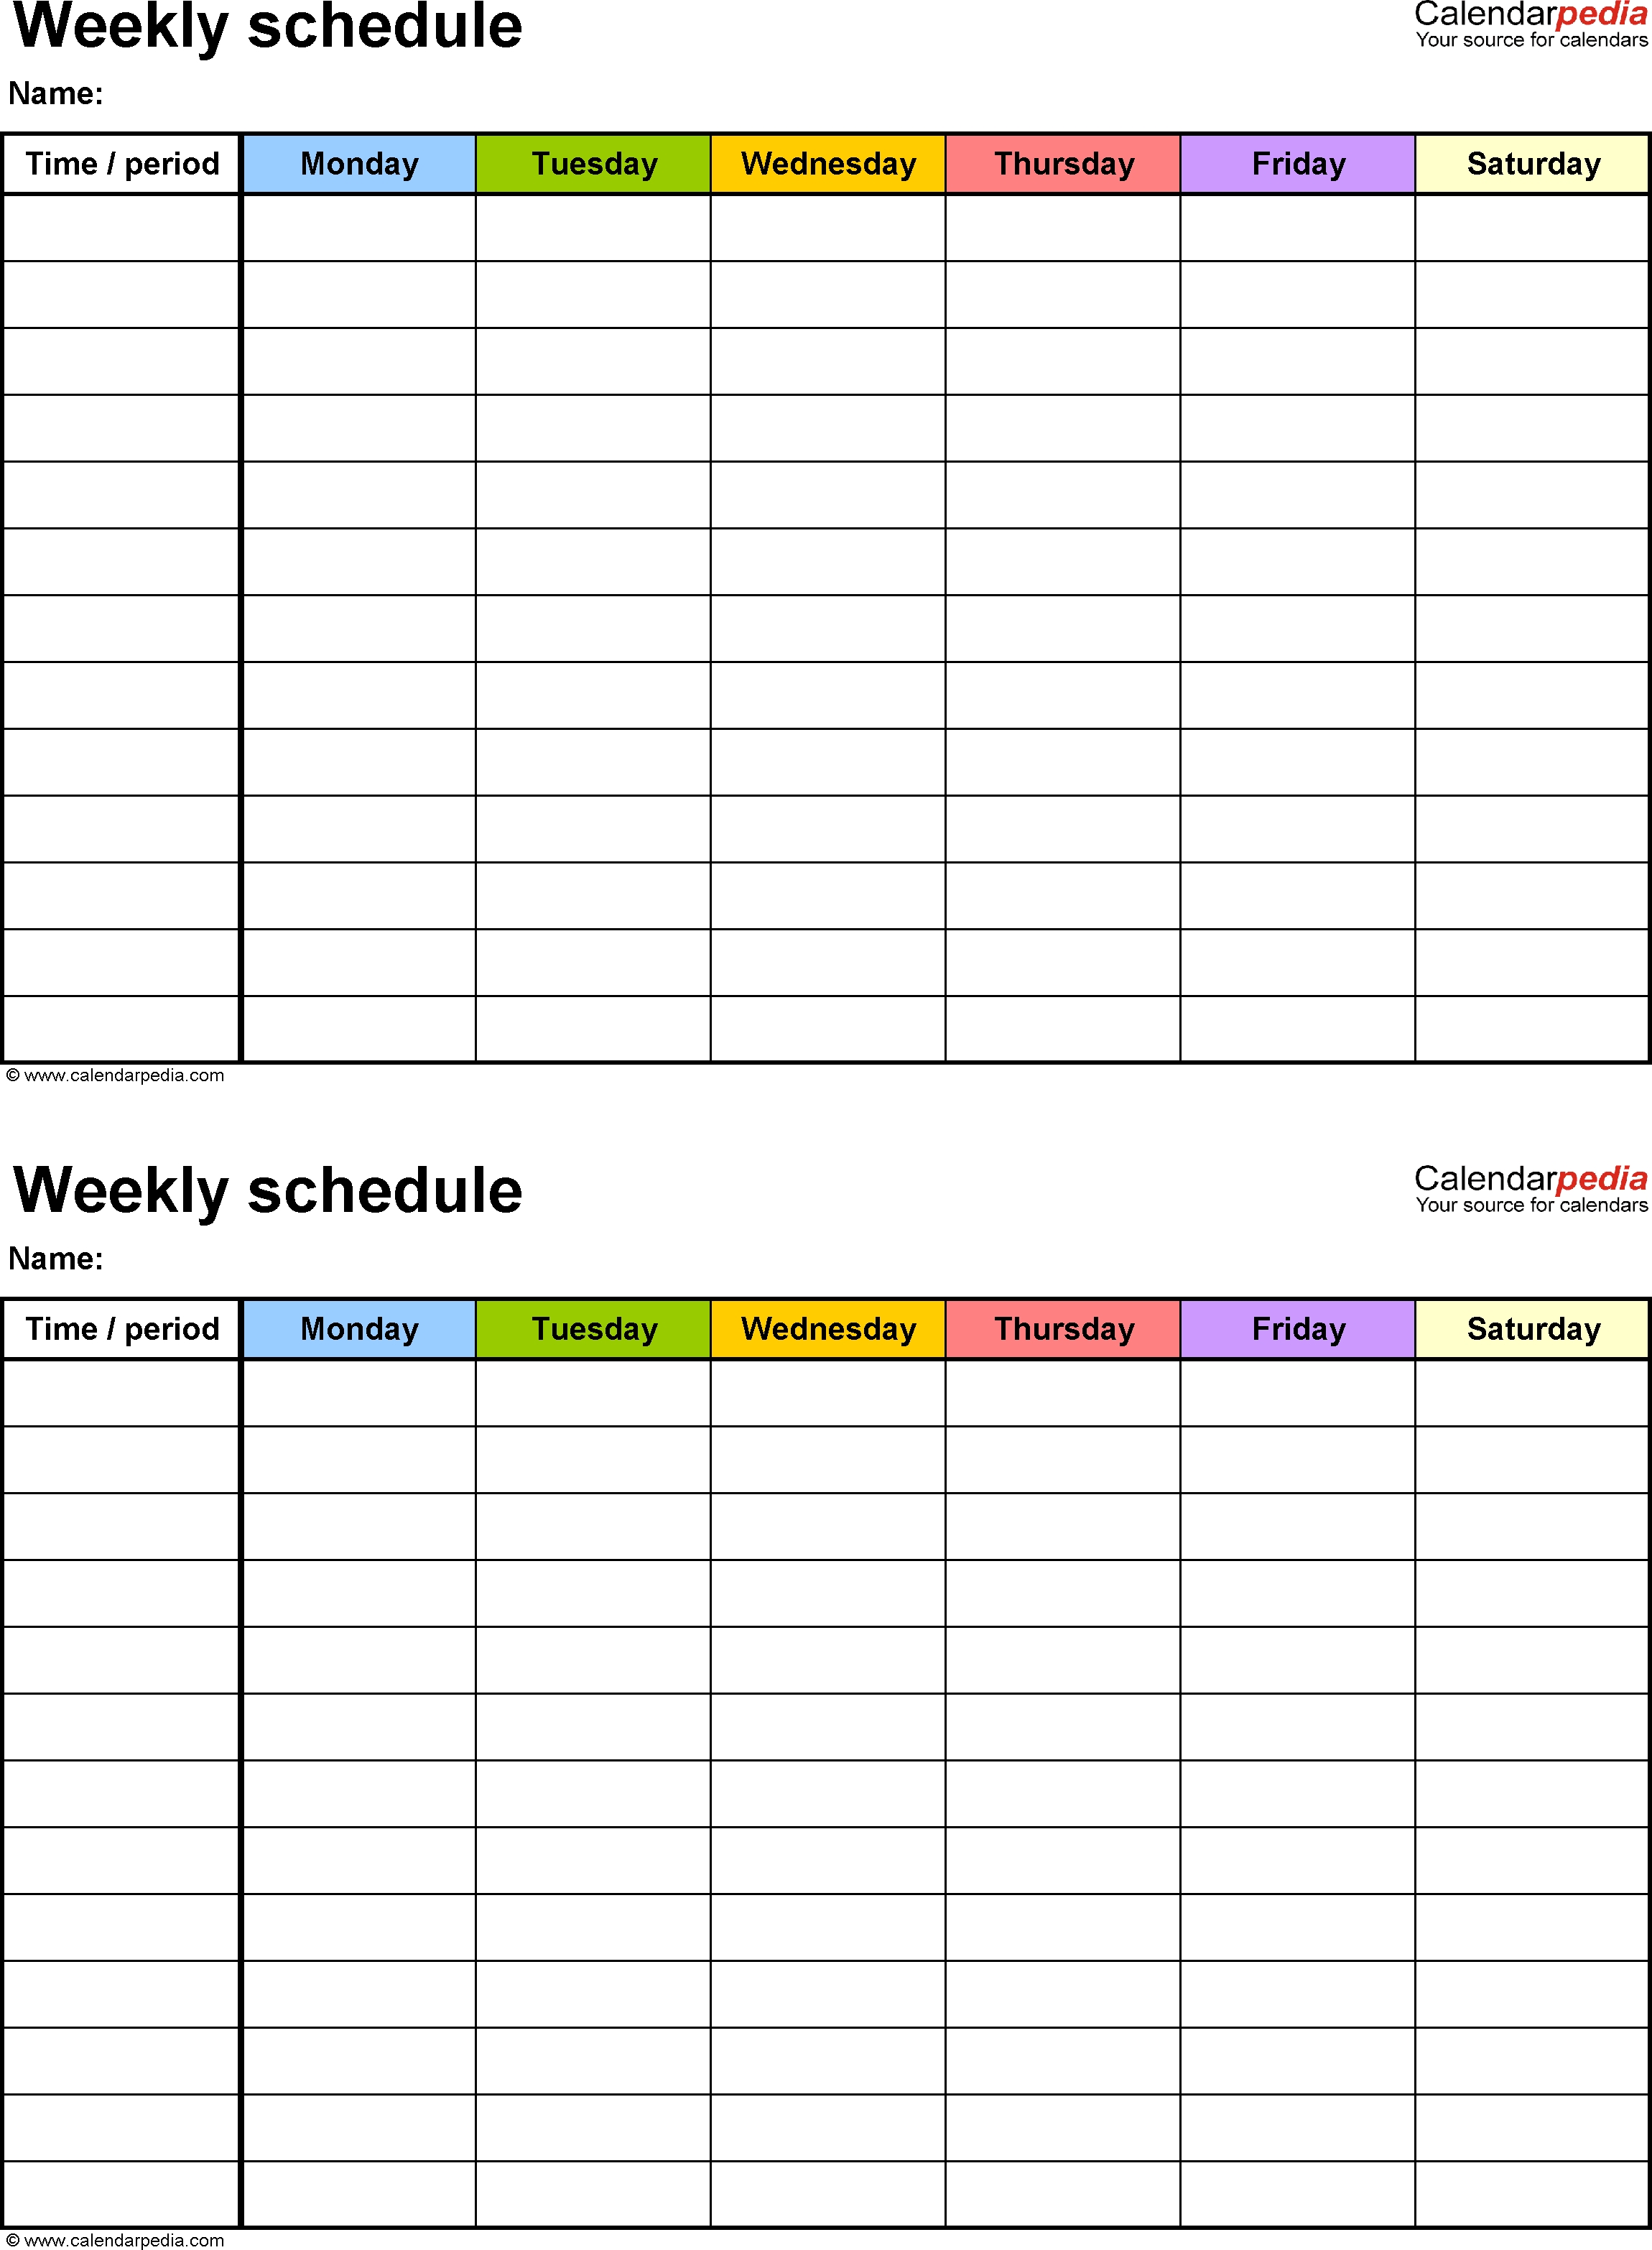 Free Weekly Schedule Templates For Word - 18 Templates 7 Day Calendar Template Excel